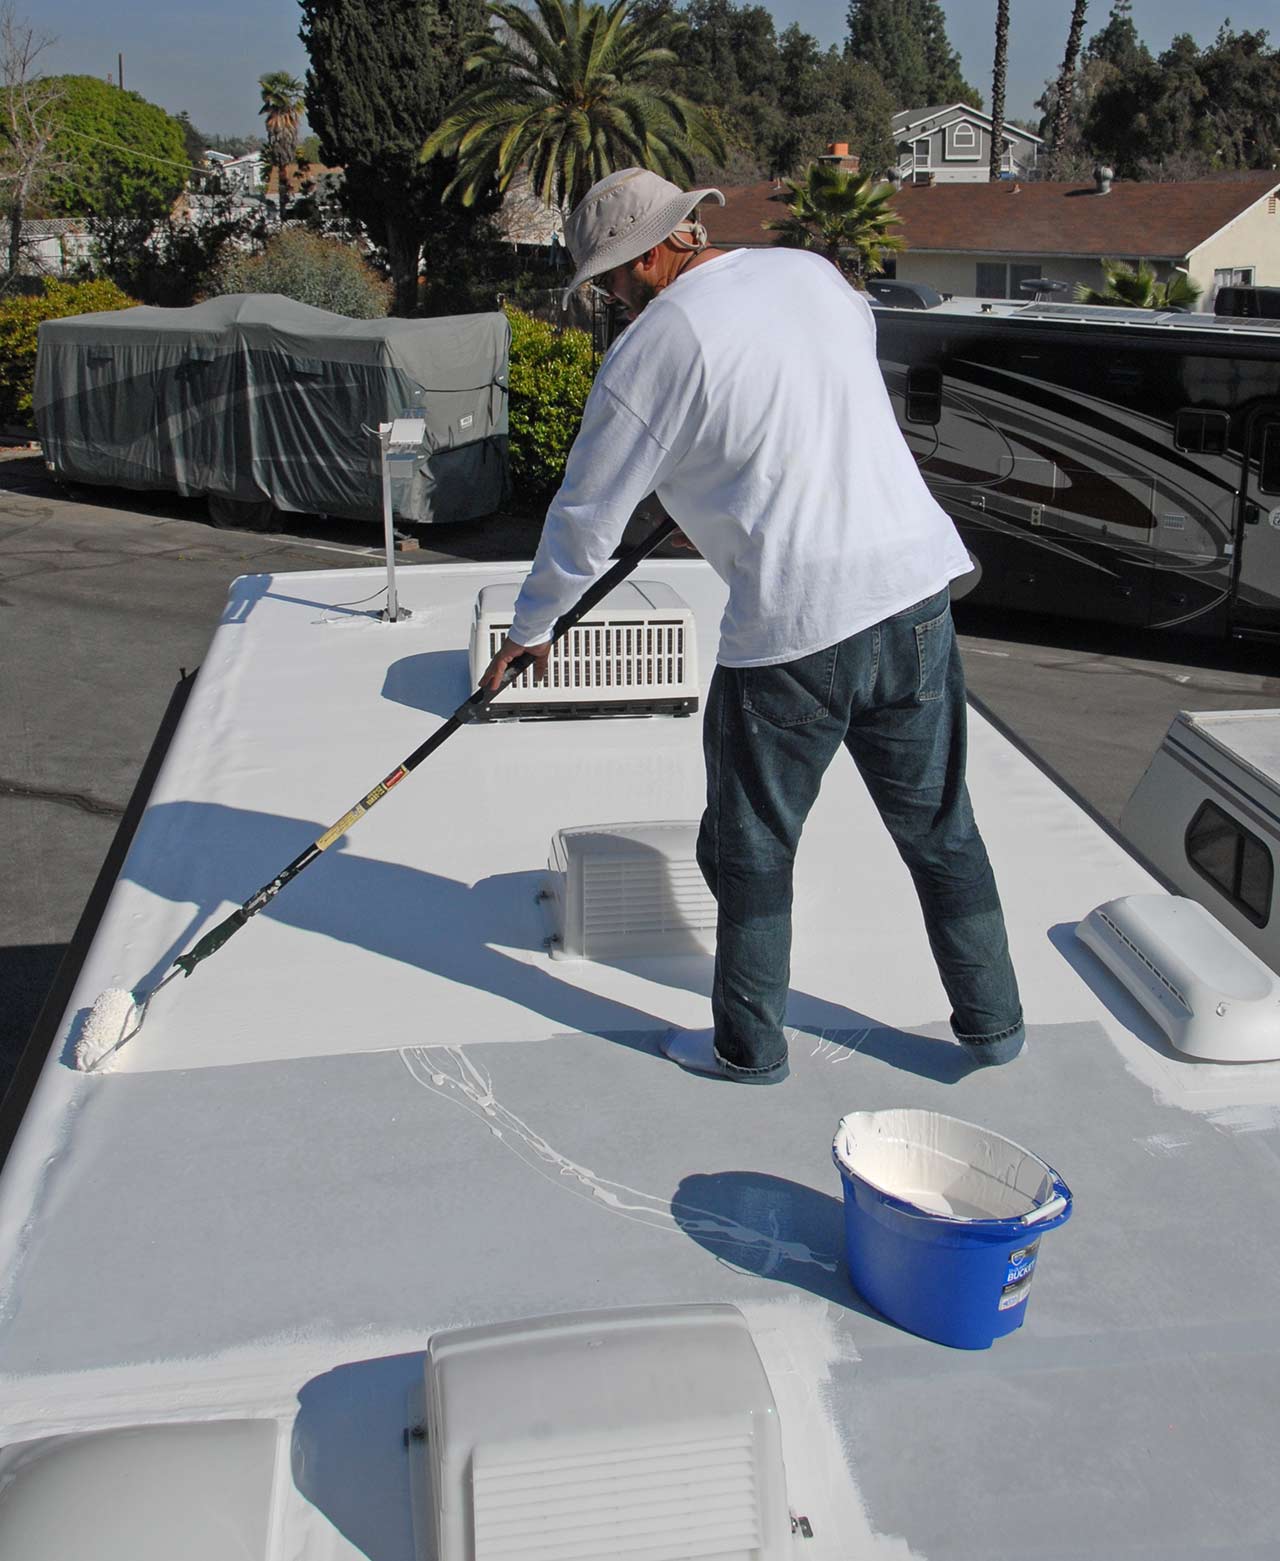 Cleaning the roof of an RV